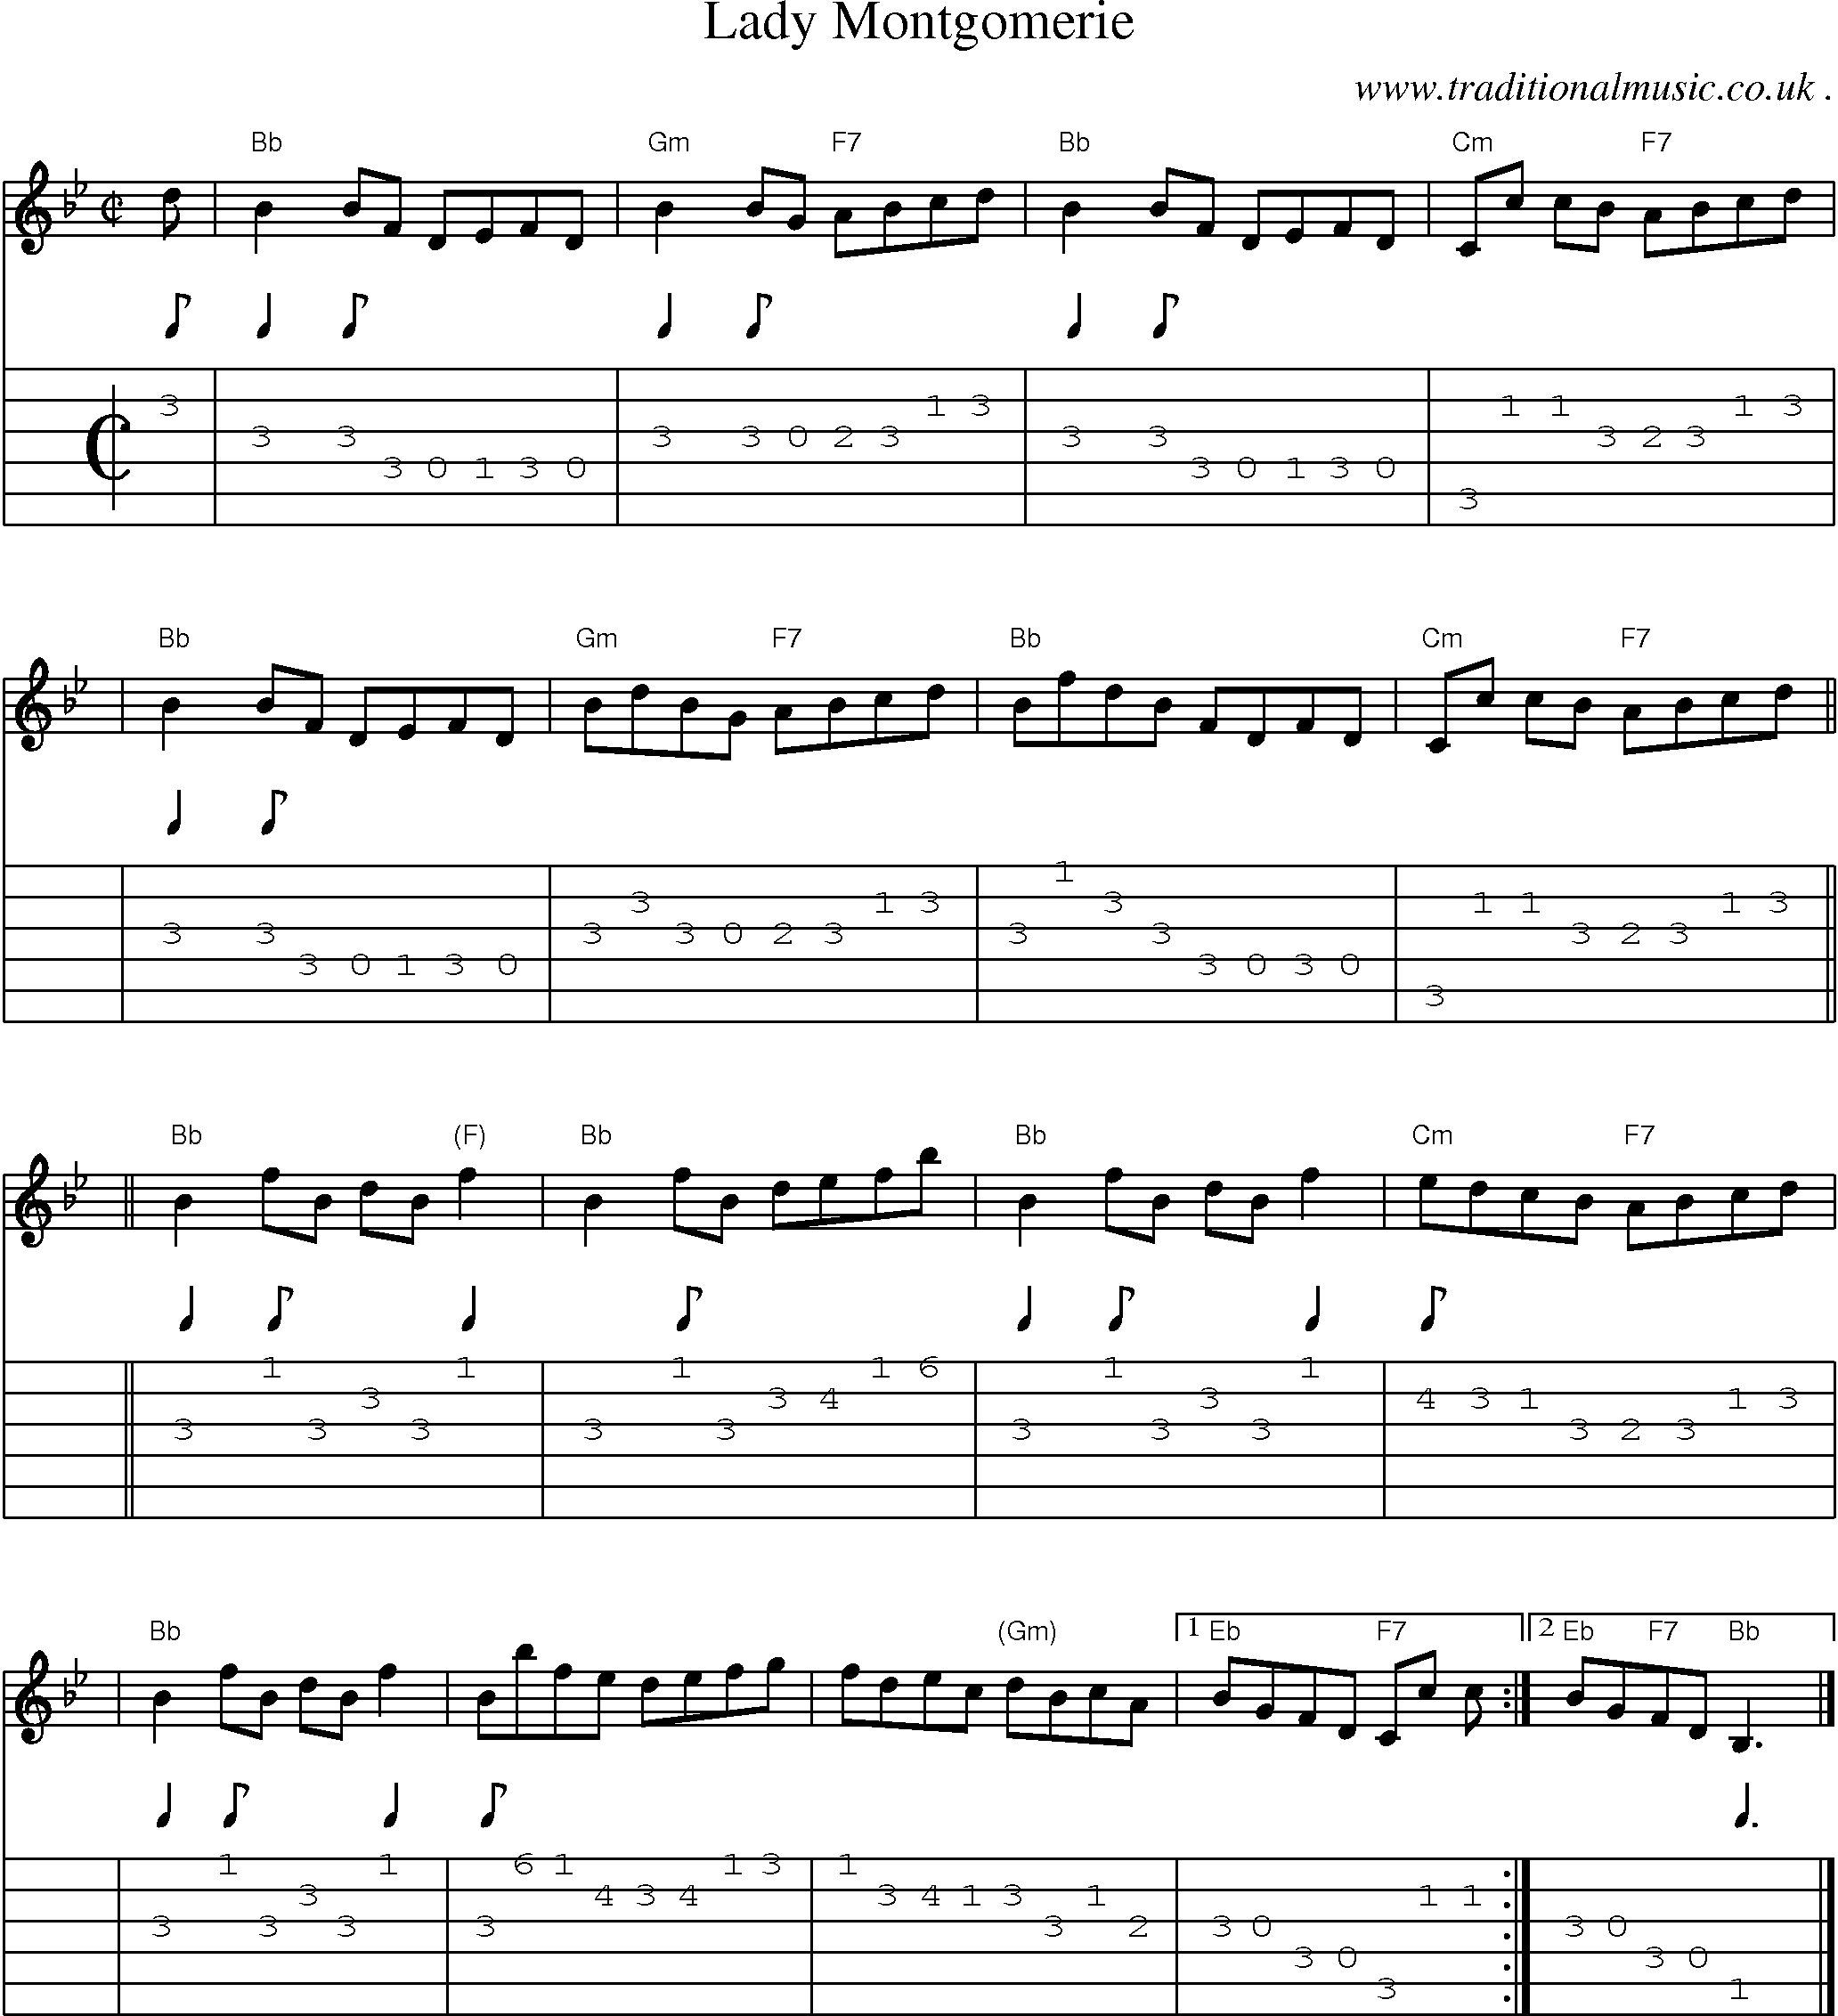 Sheet-music  score, Chords and Guitar Tabs for Lady Montgomerie